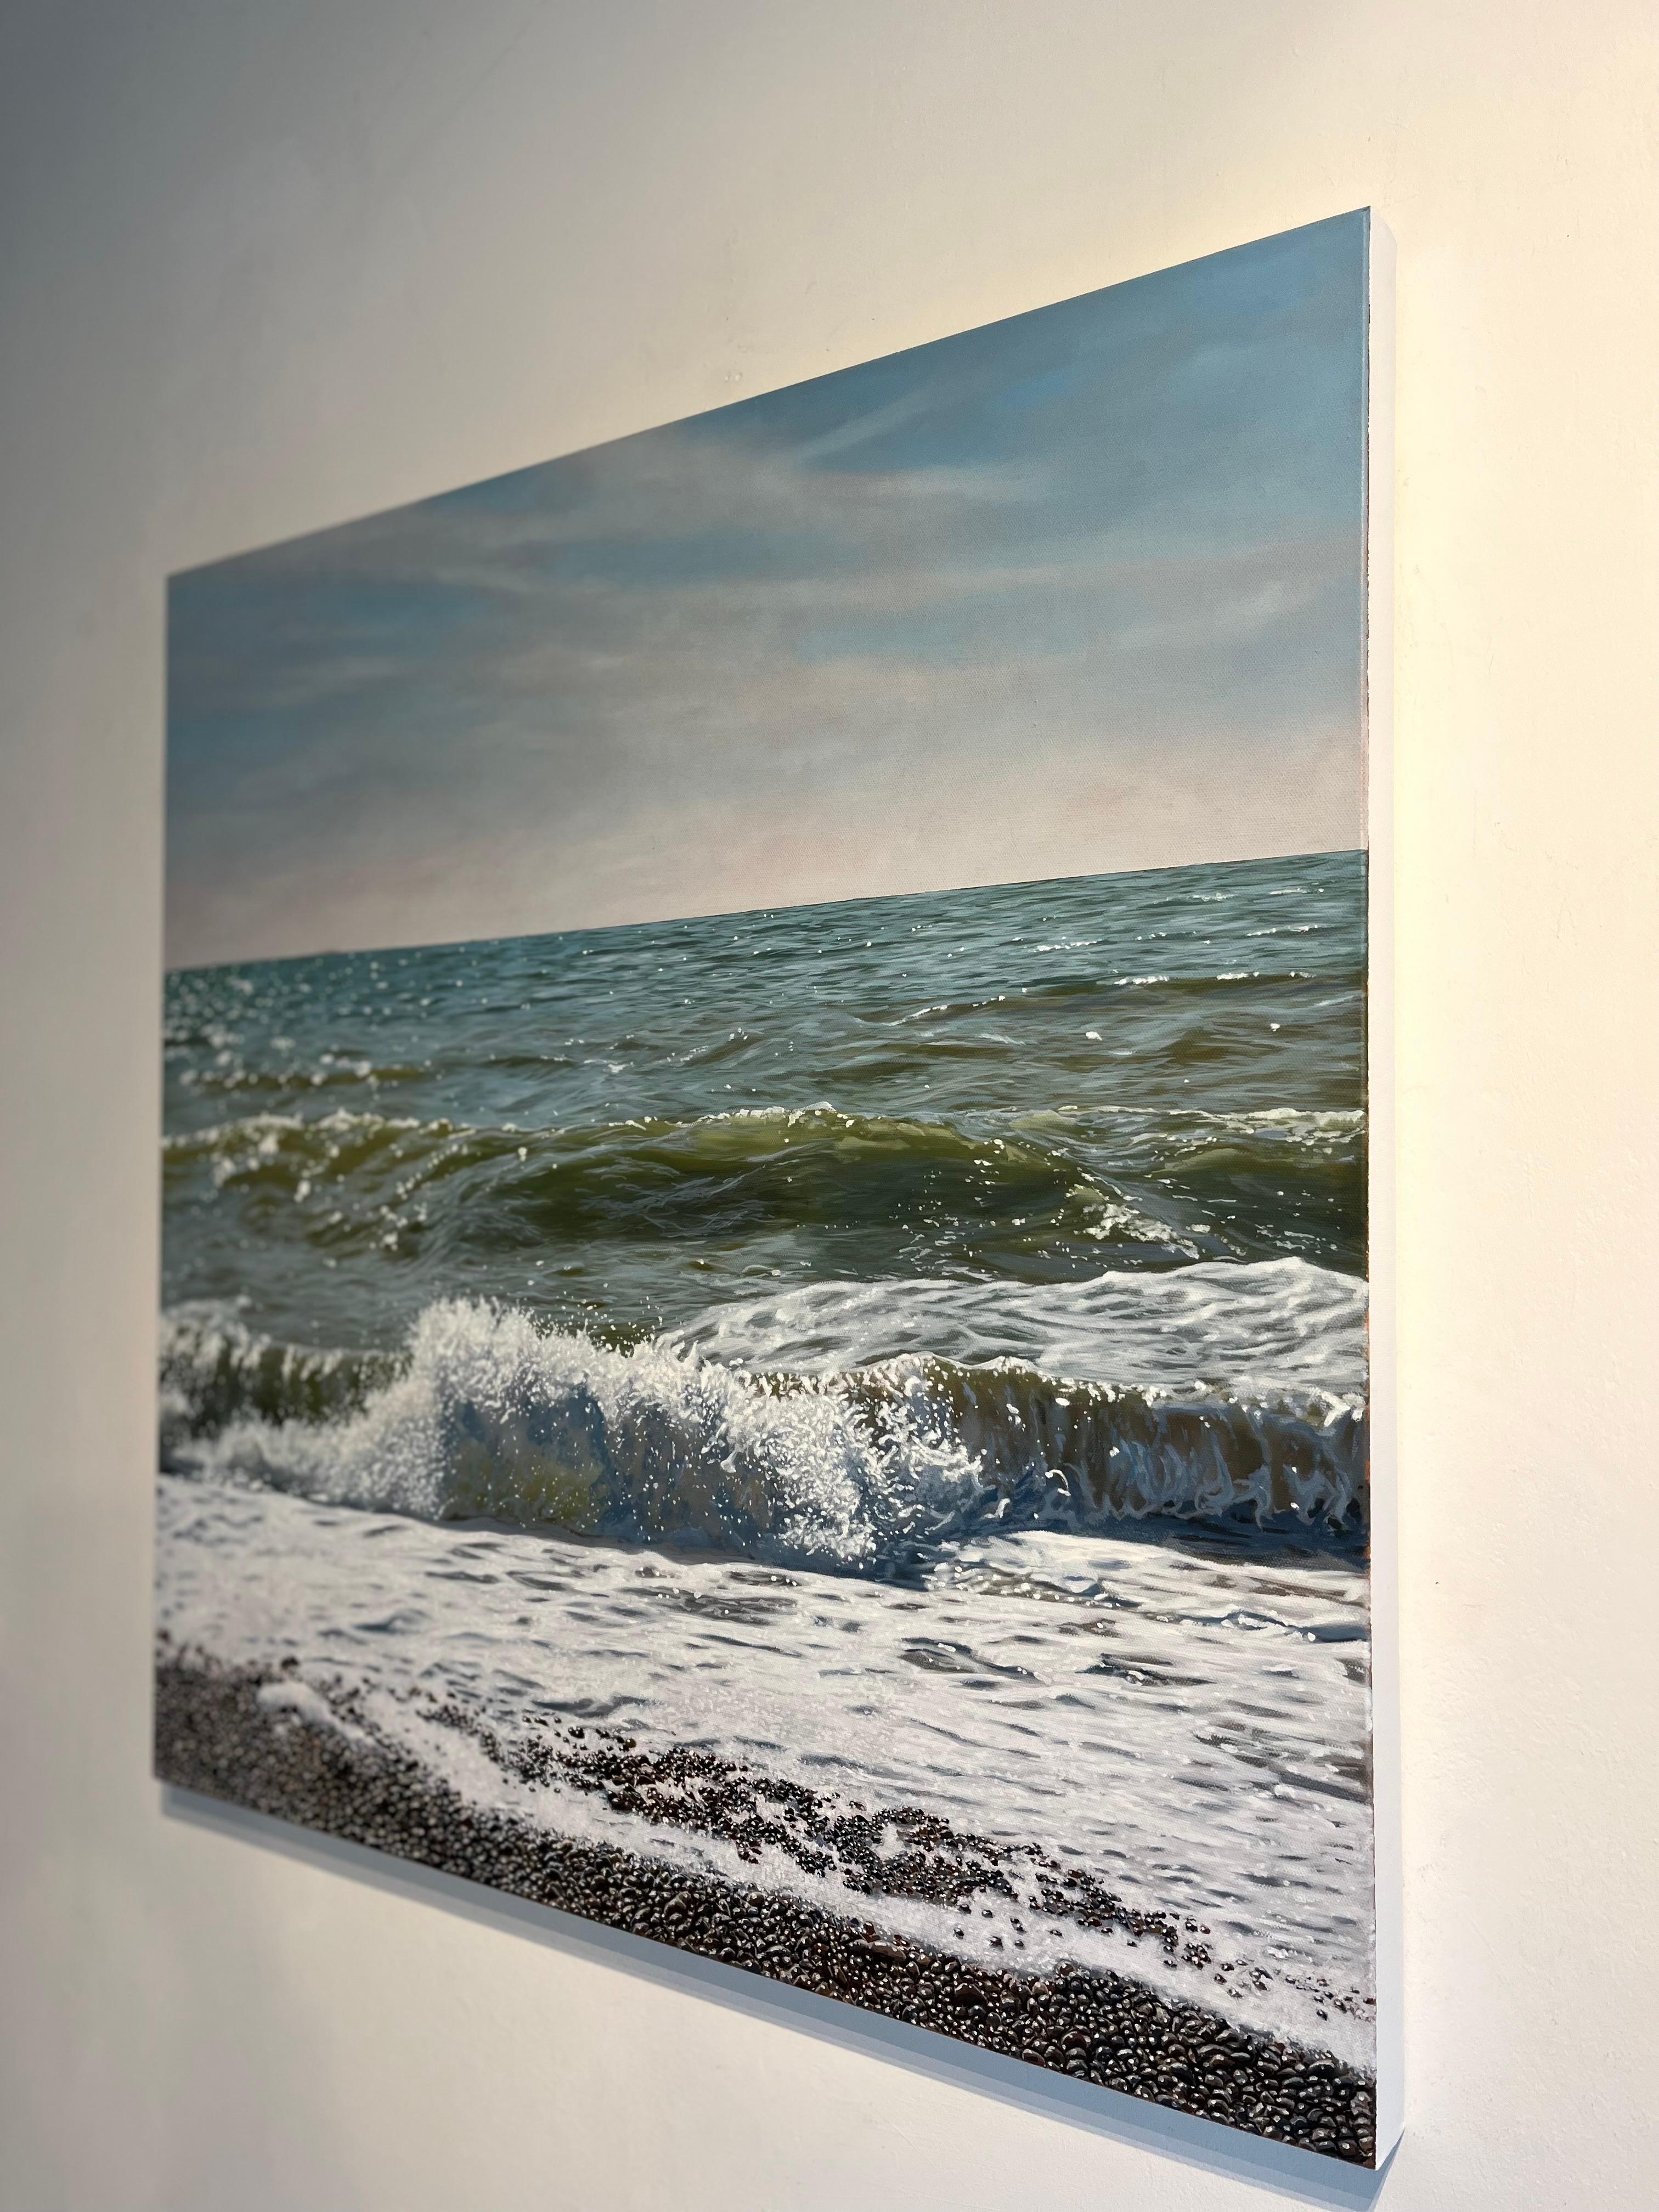 Breaking Wave-original hyper realism seascape oil painting-contemporary Art - Photorealist Painting by Christopher Witchall